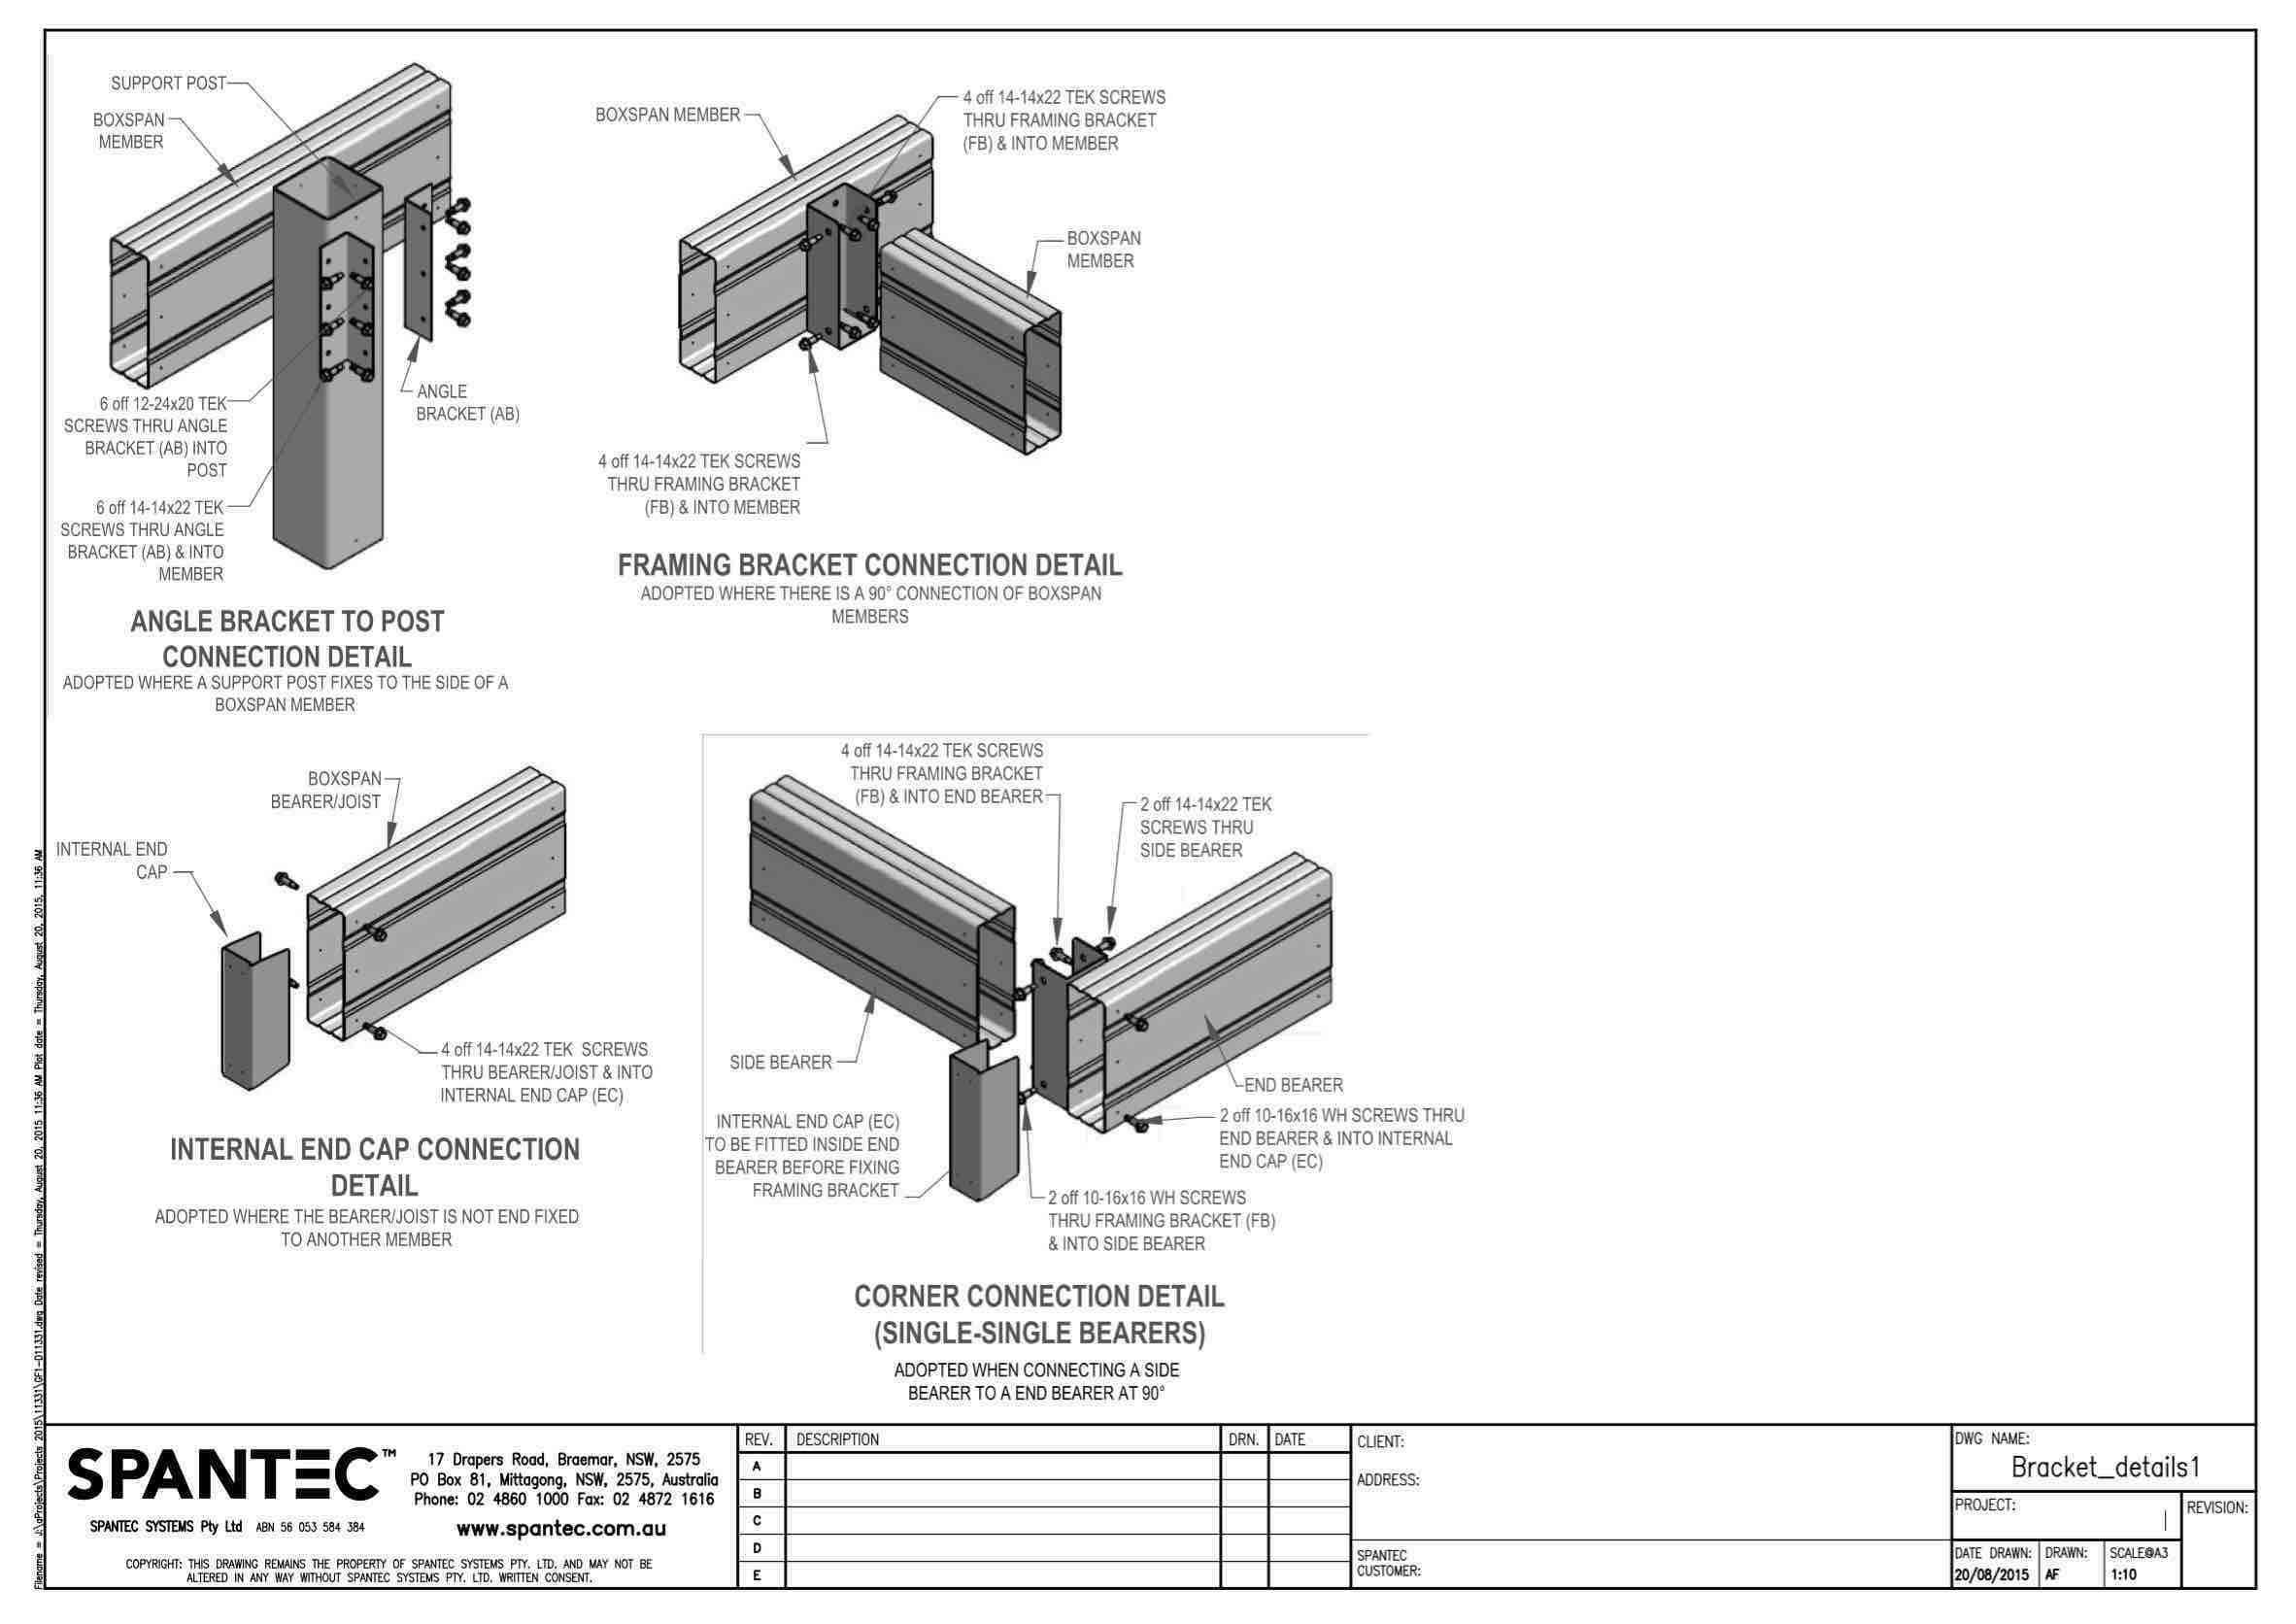 Bracket connection detail drawing for steelfloors AB100 AB150 AB200 AB250 FB100 FB150 FB200 FB250 IEC100 IEC150 IEC200 IEC250 CB100 CB150 CB200 CB250